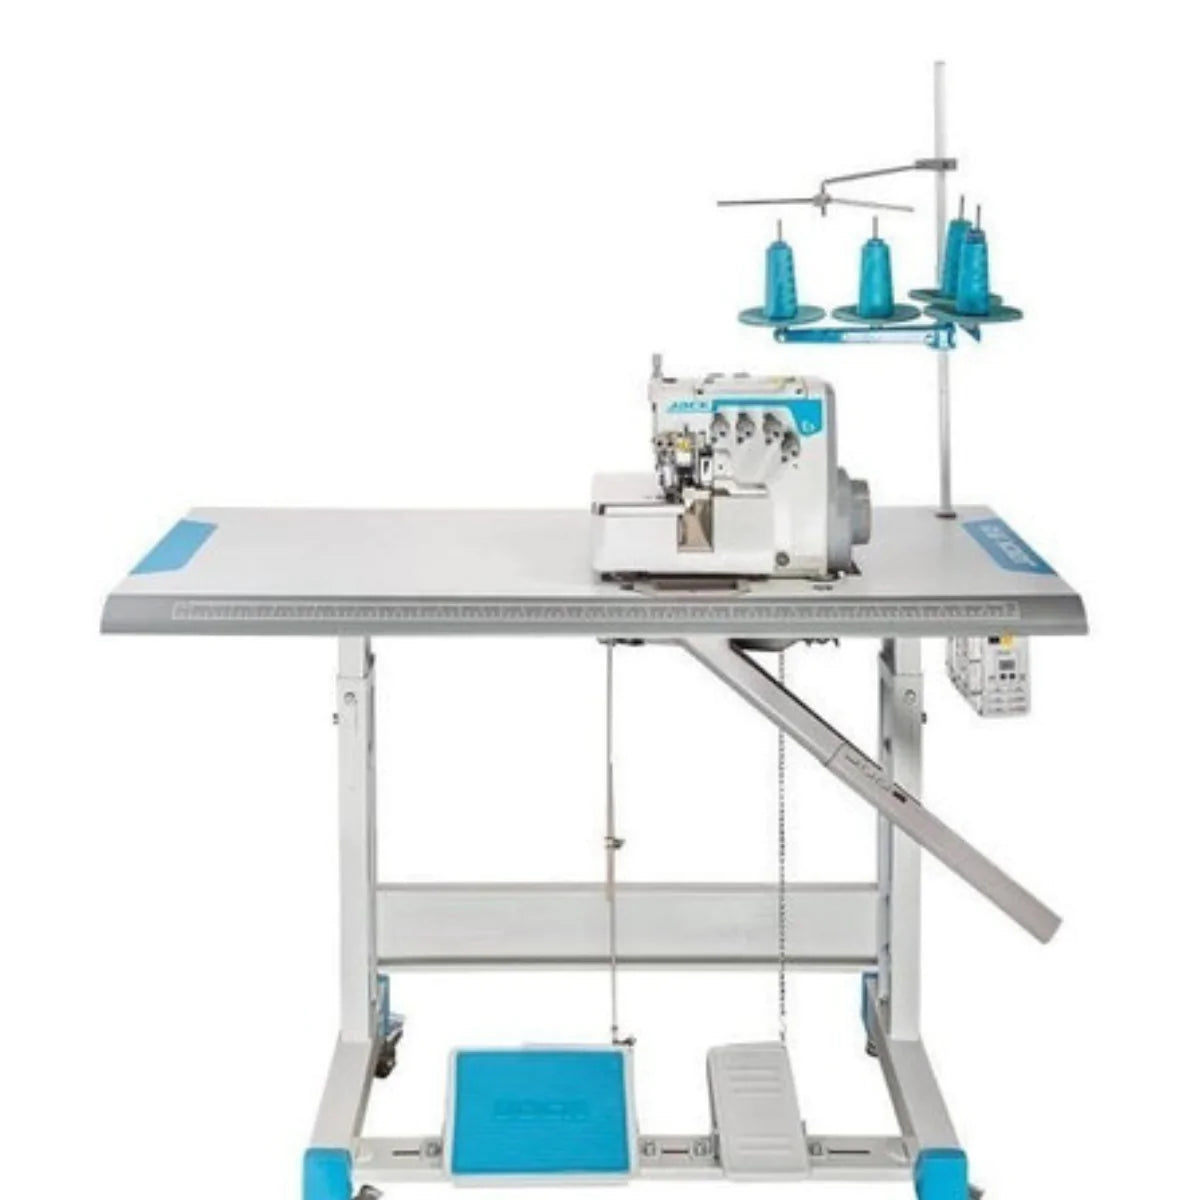 Jack E3-4 Overlock, 4 Thread Industrial Over Lock Machine (Complete Set) - MY SEWING MALL